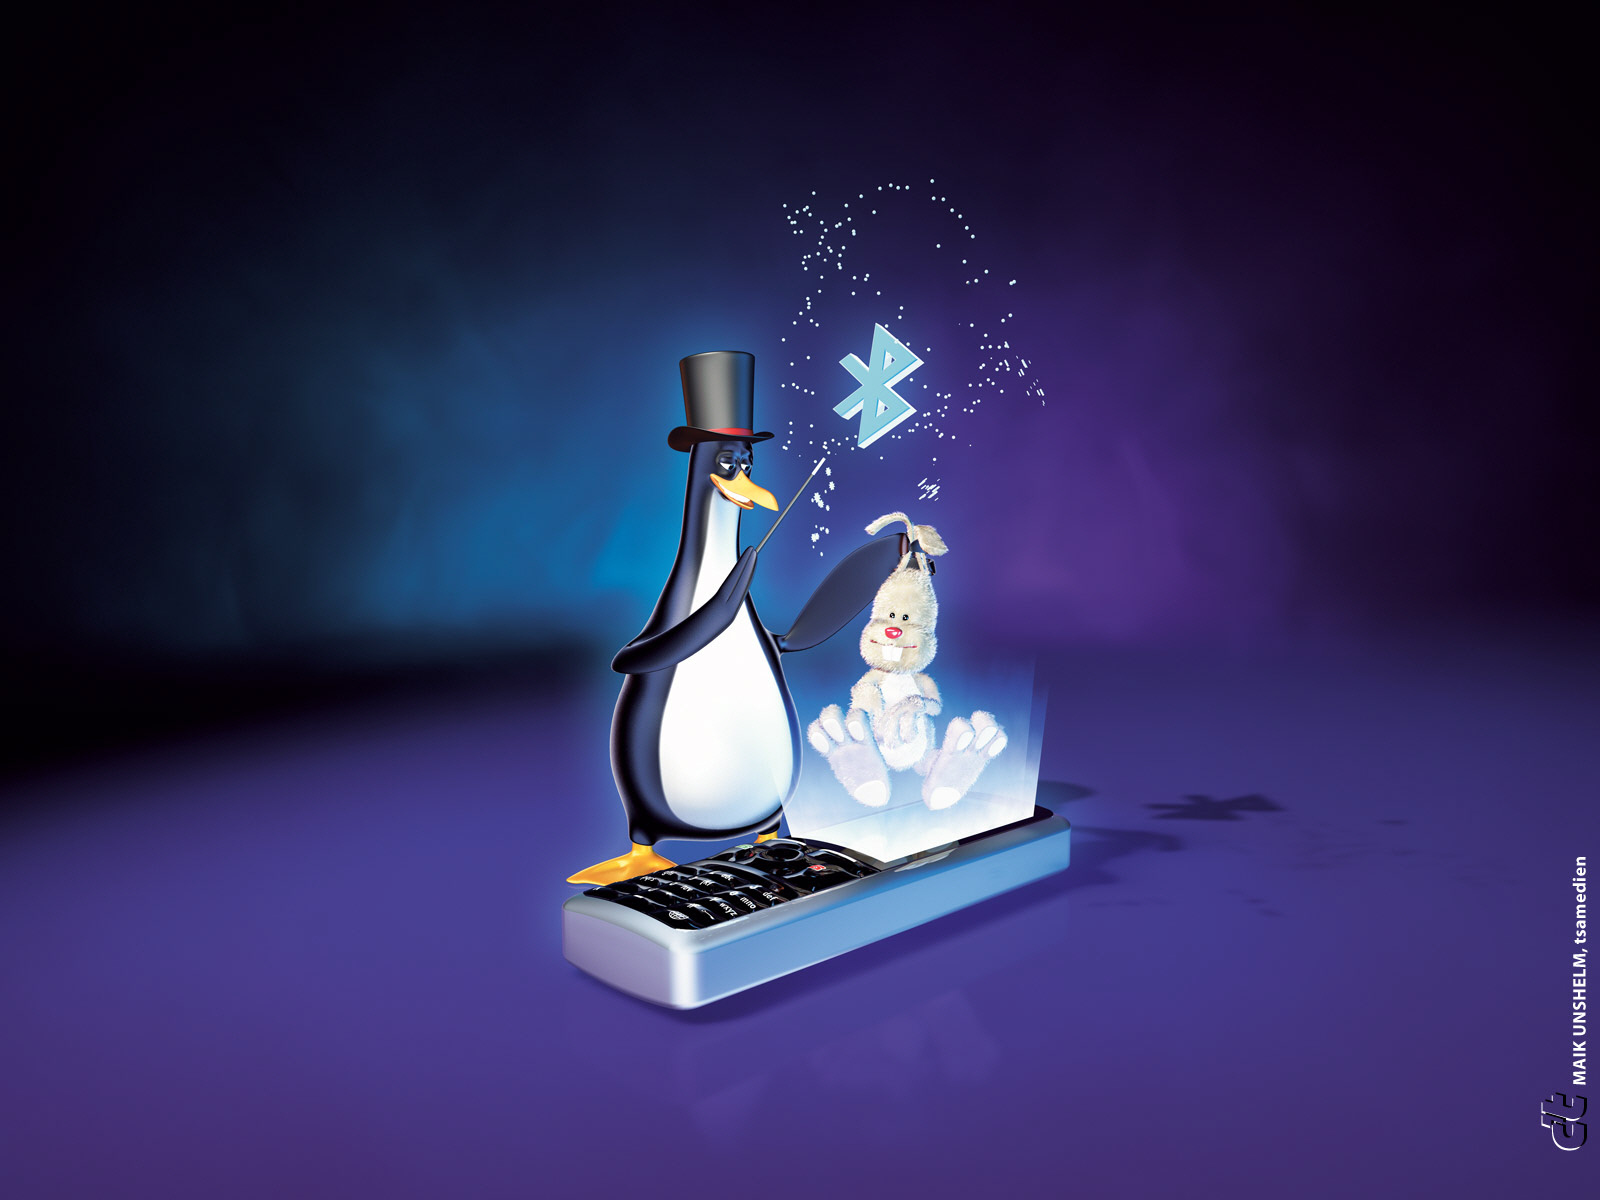 linux penguin wallpaper,animation,graphic design,still life photography,games,photography